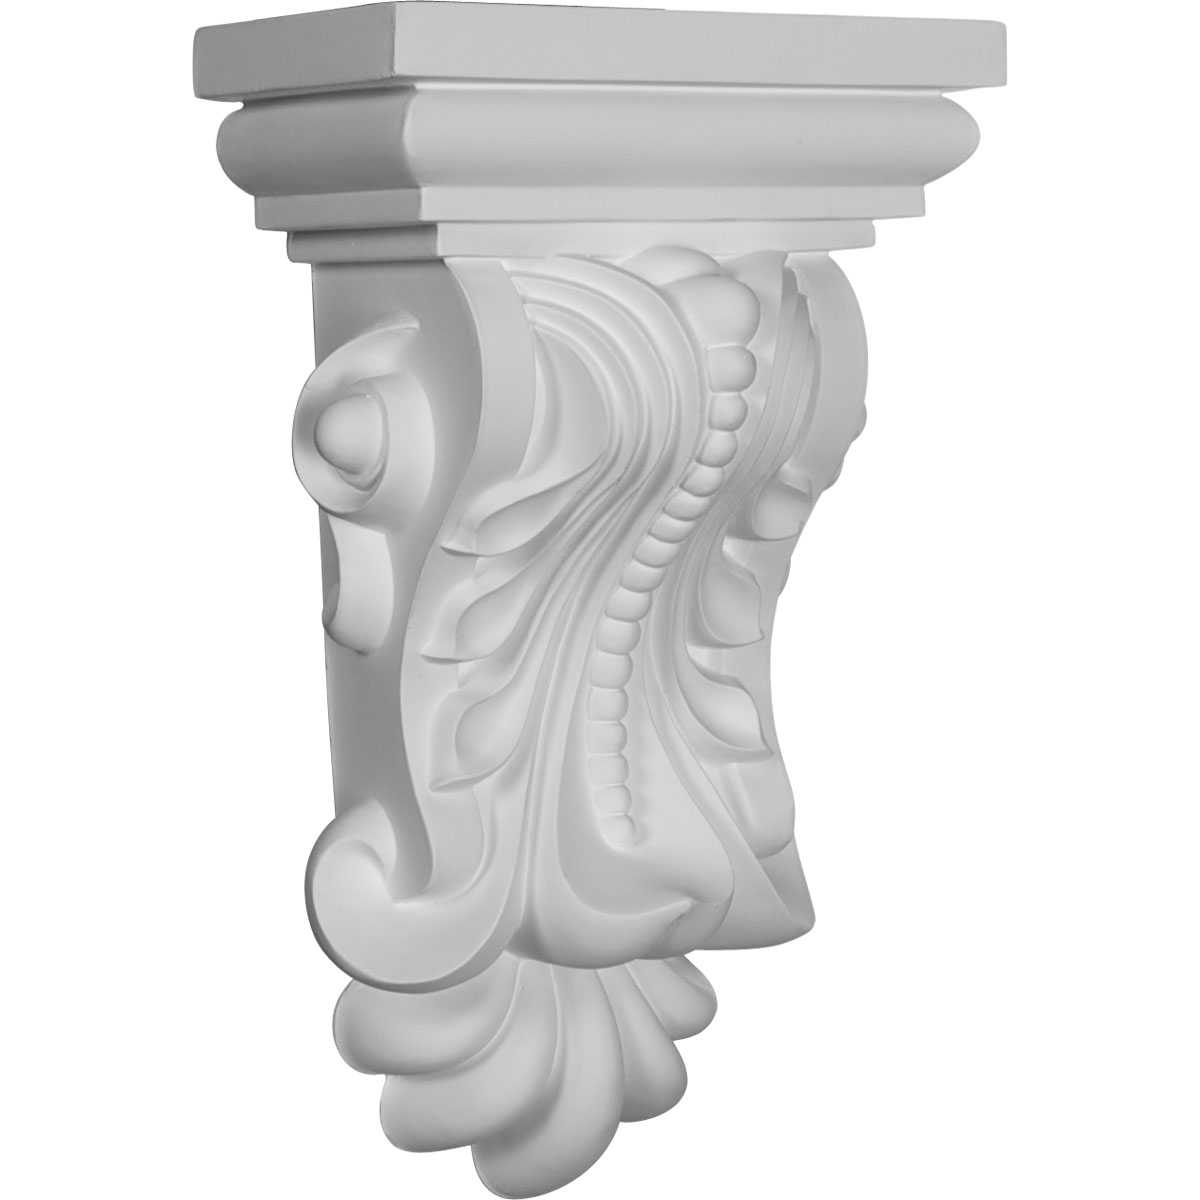 Ekena Millwork 13 3/8''H x 7 7/8''W x 5 1/8''D Beaded with Leaves Corbel